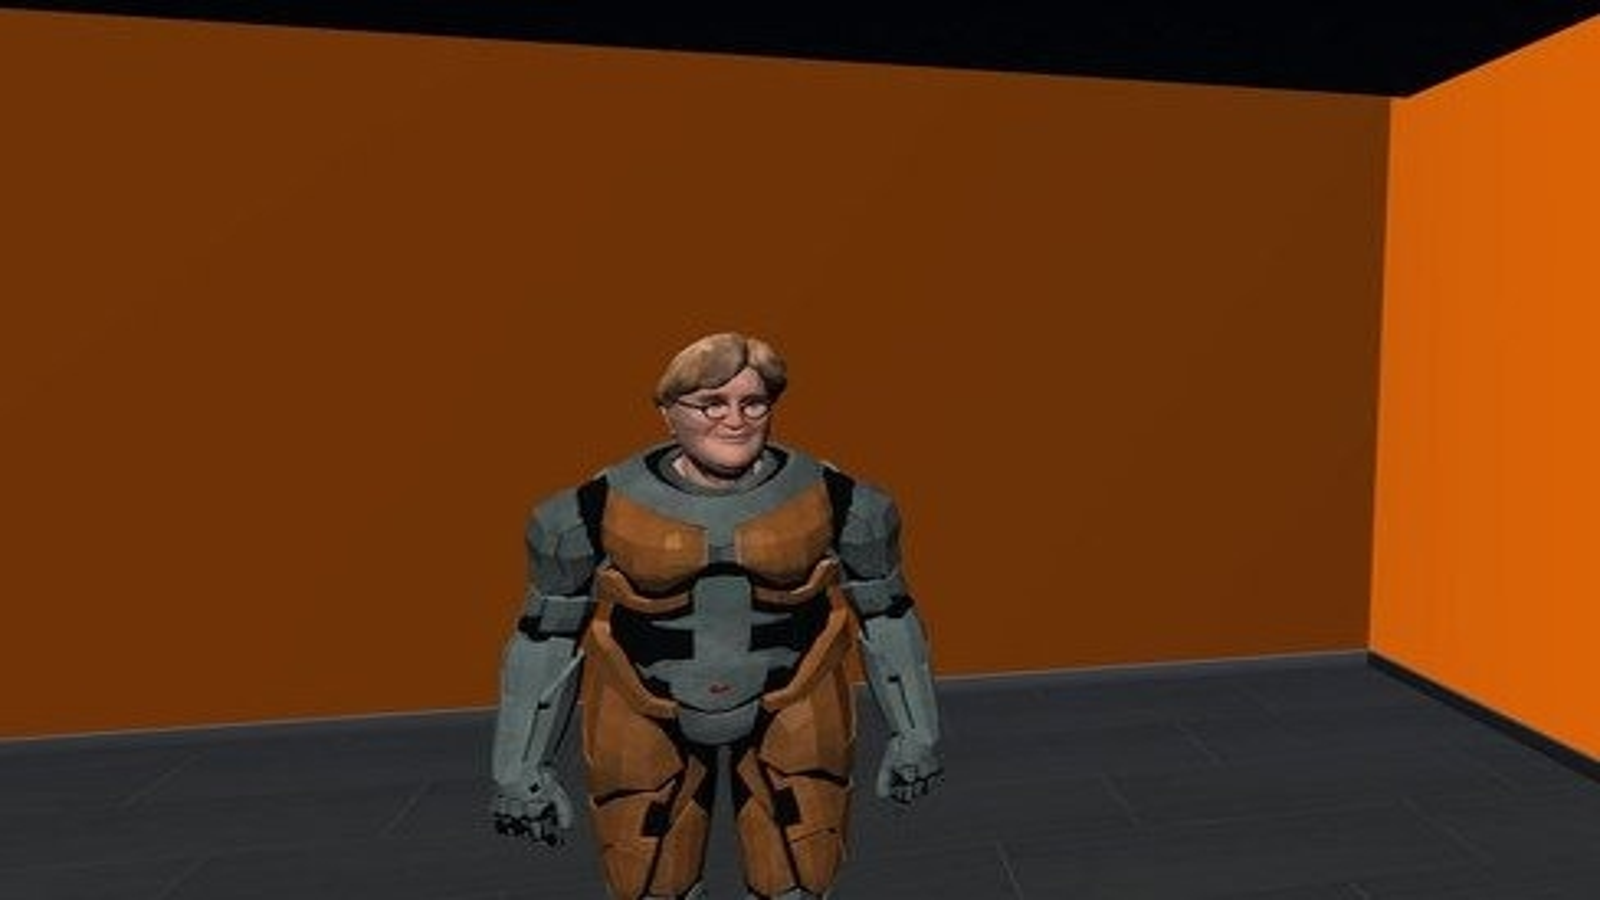 Gabe Newell Simulator looks like an actual game that's coming out